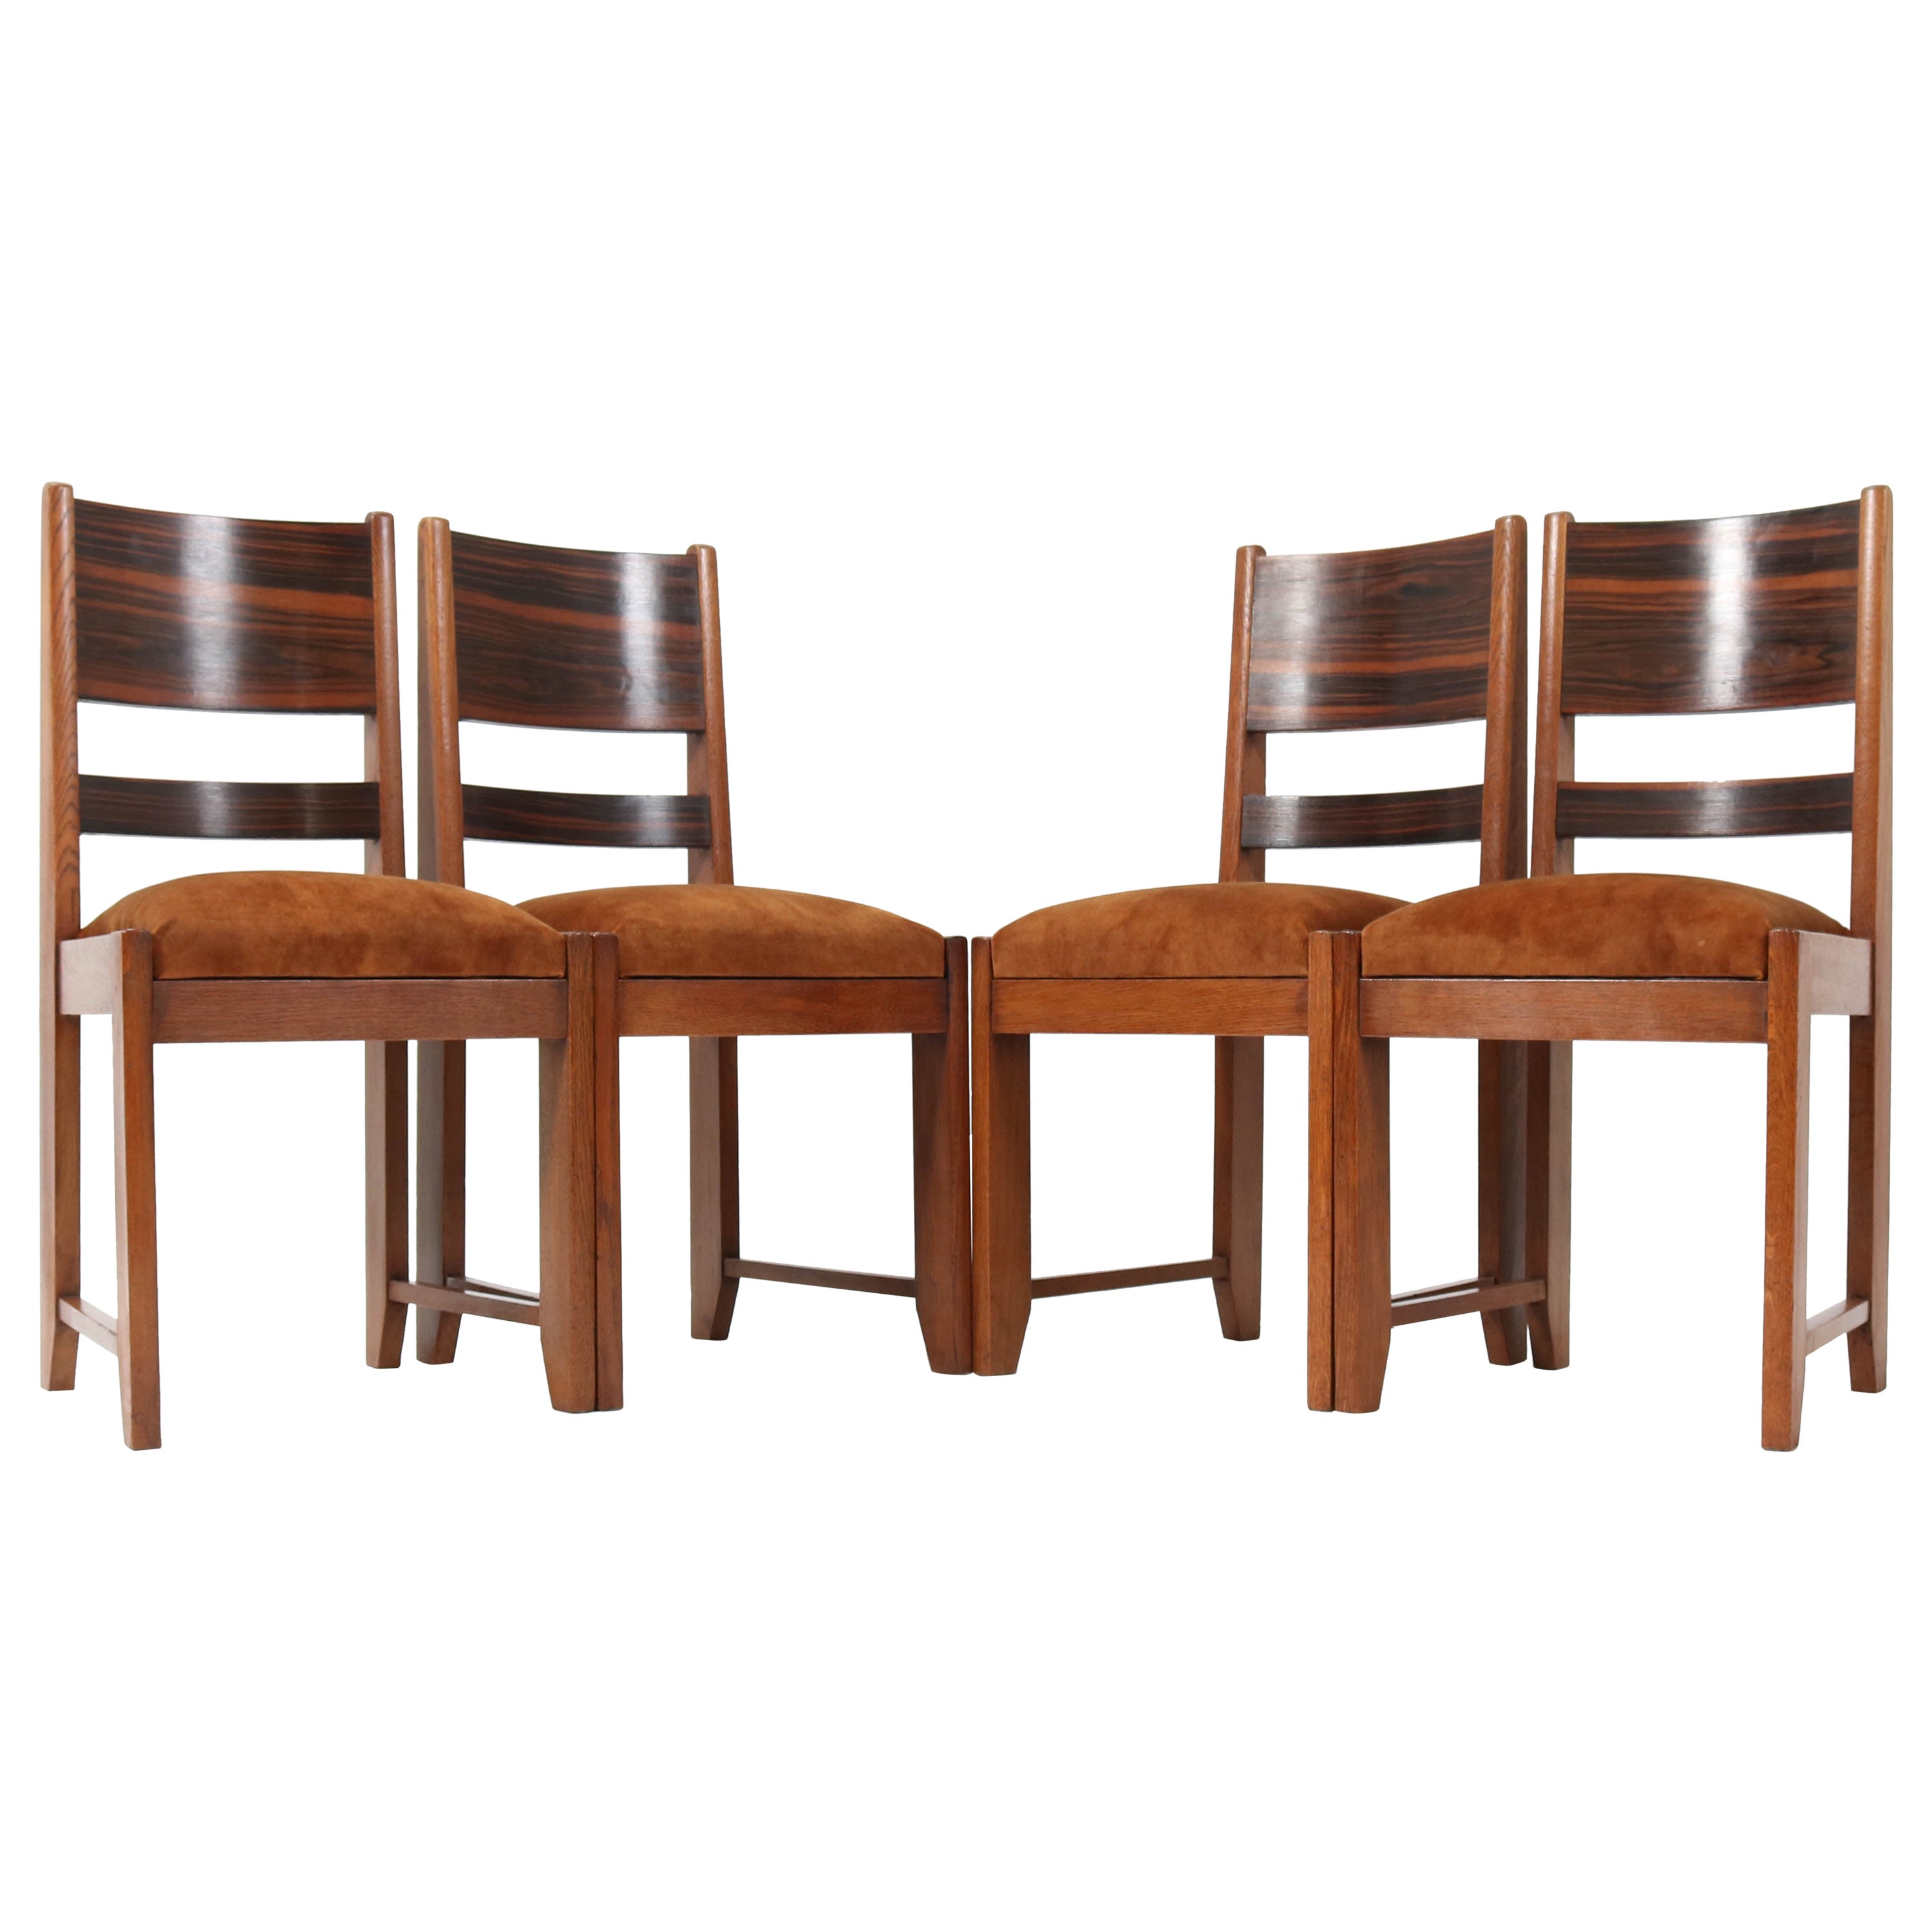 Four Oak Art Deco Haagse School Dining Room Chairs, 1920s